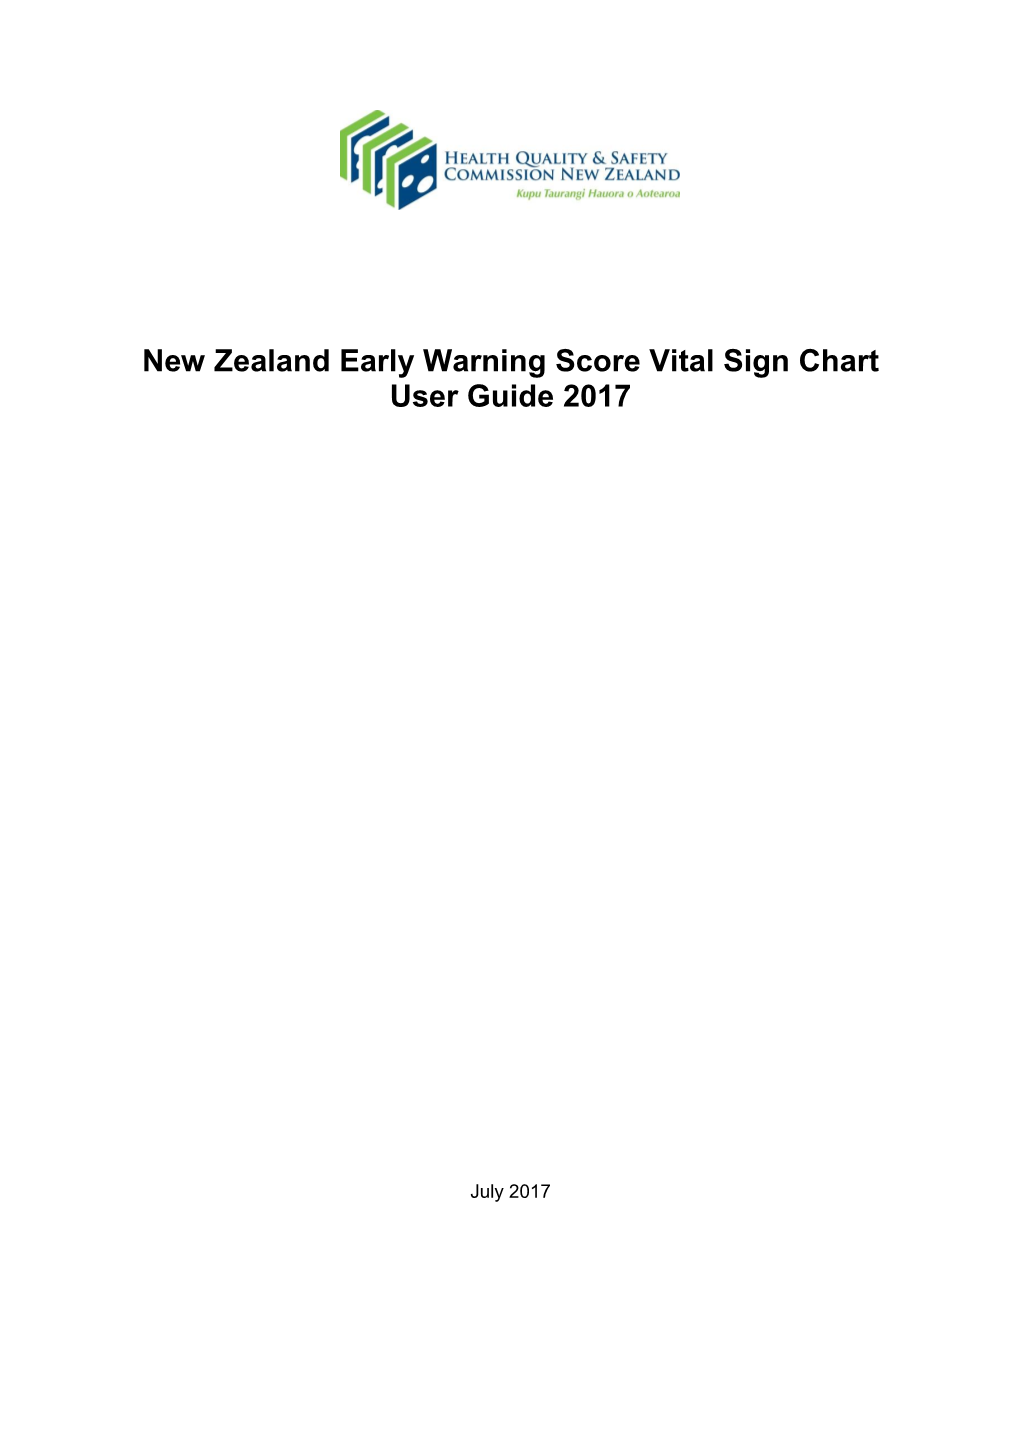 New Zealand Early Warning Score Vital Sign Chart User Guide 2017